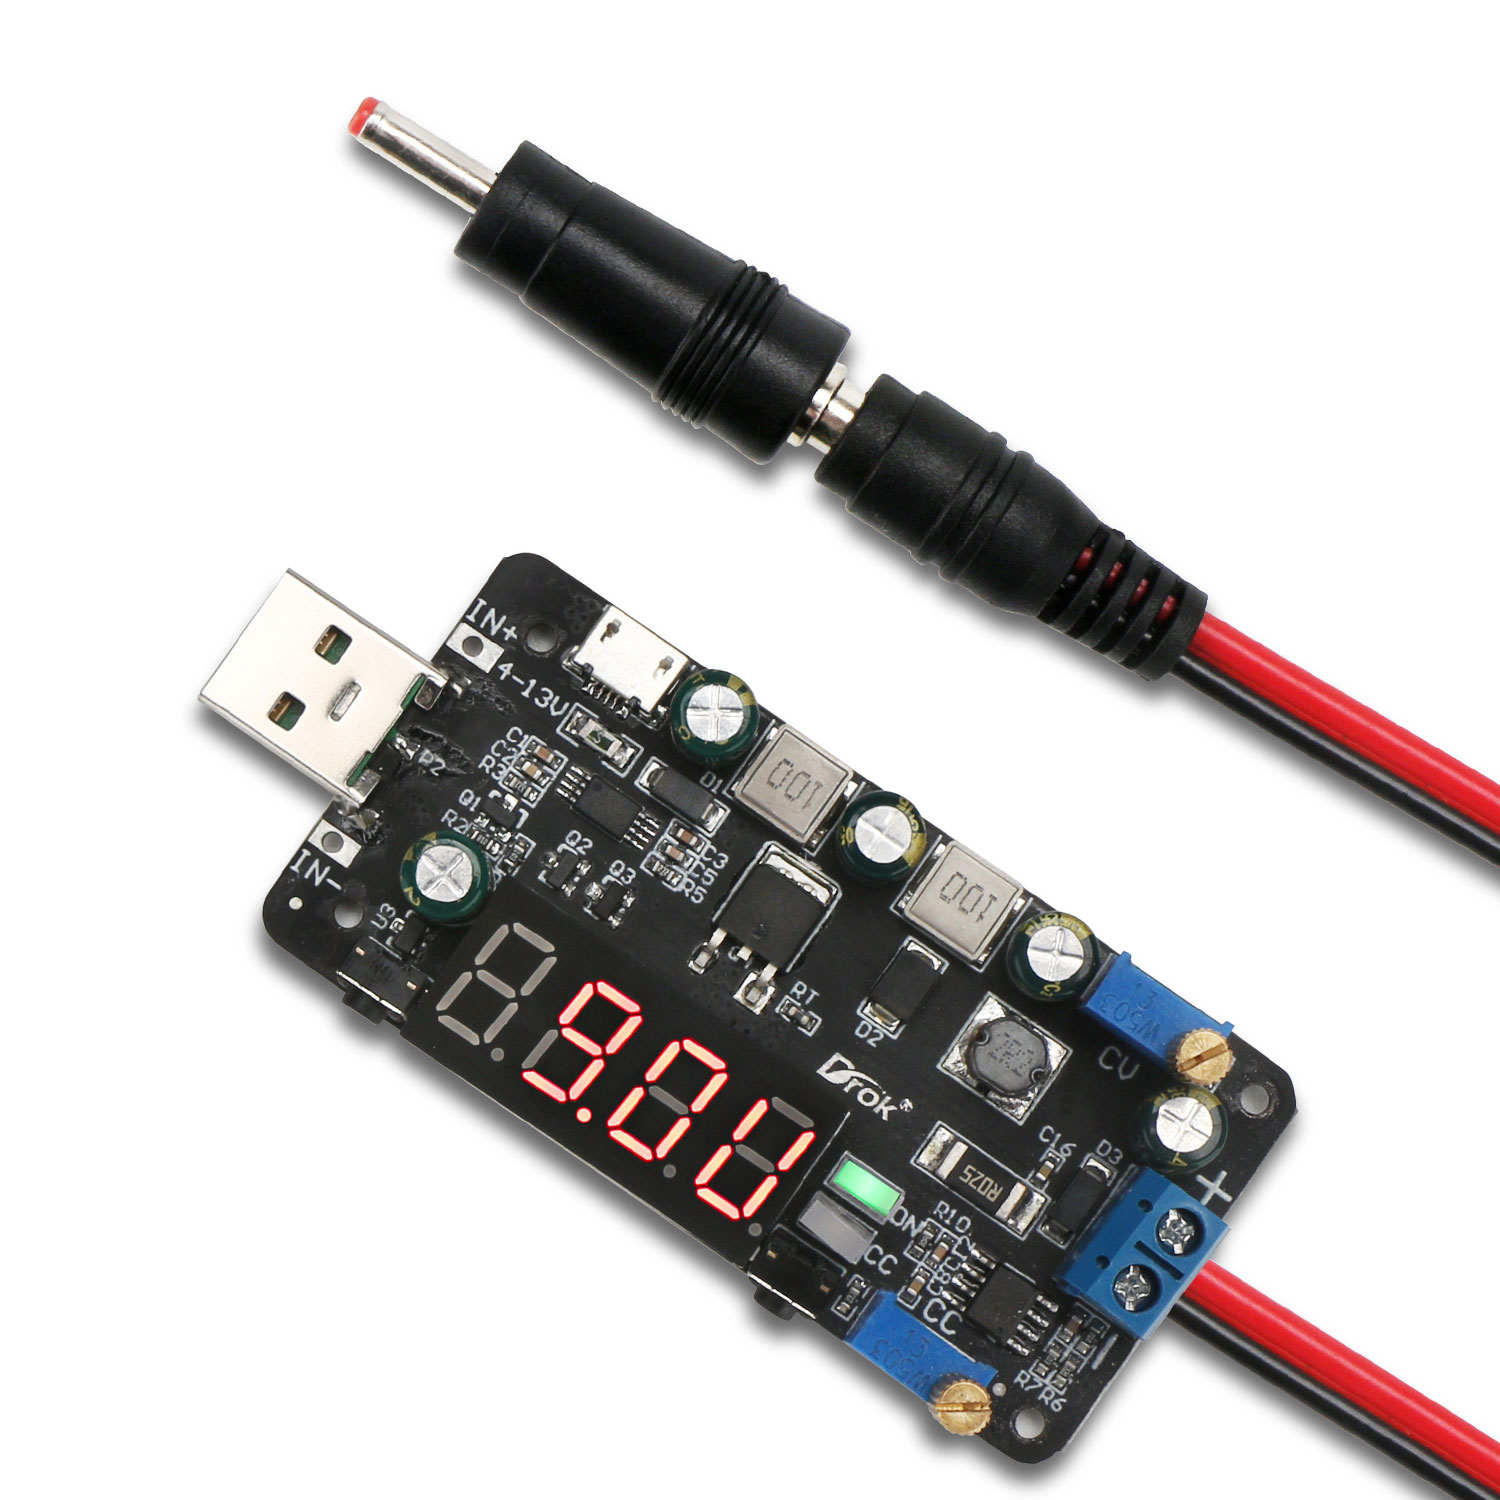 Details about   USB Adjustable 15W Step Up/Down Power Supply 5V to 0.5-30V Buck Boost Converter 